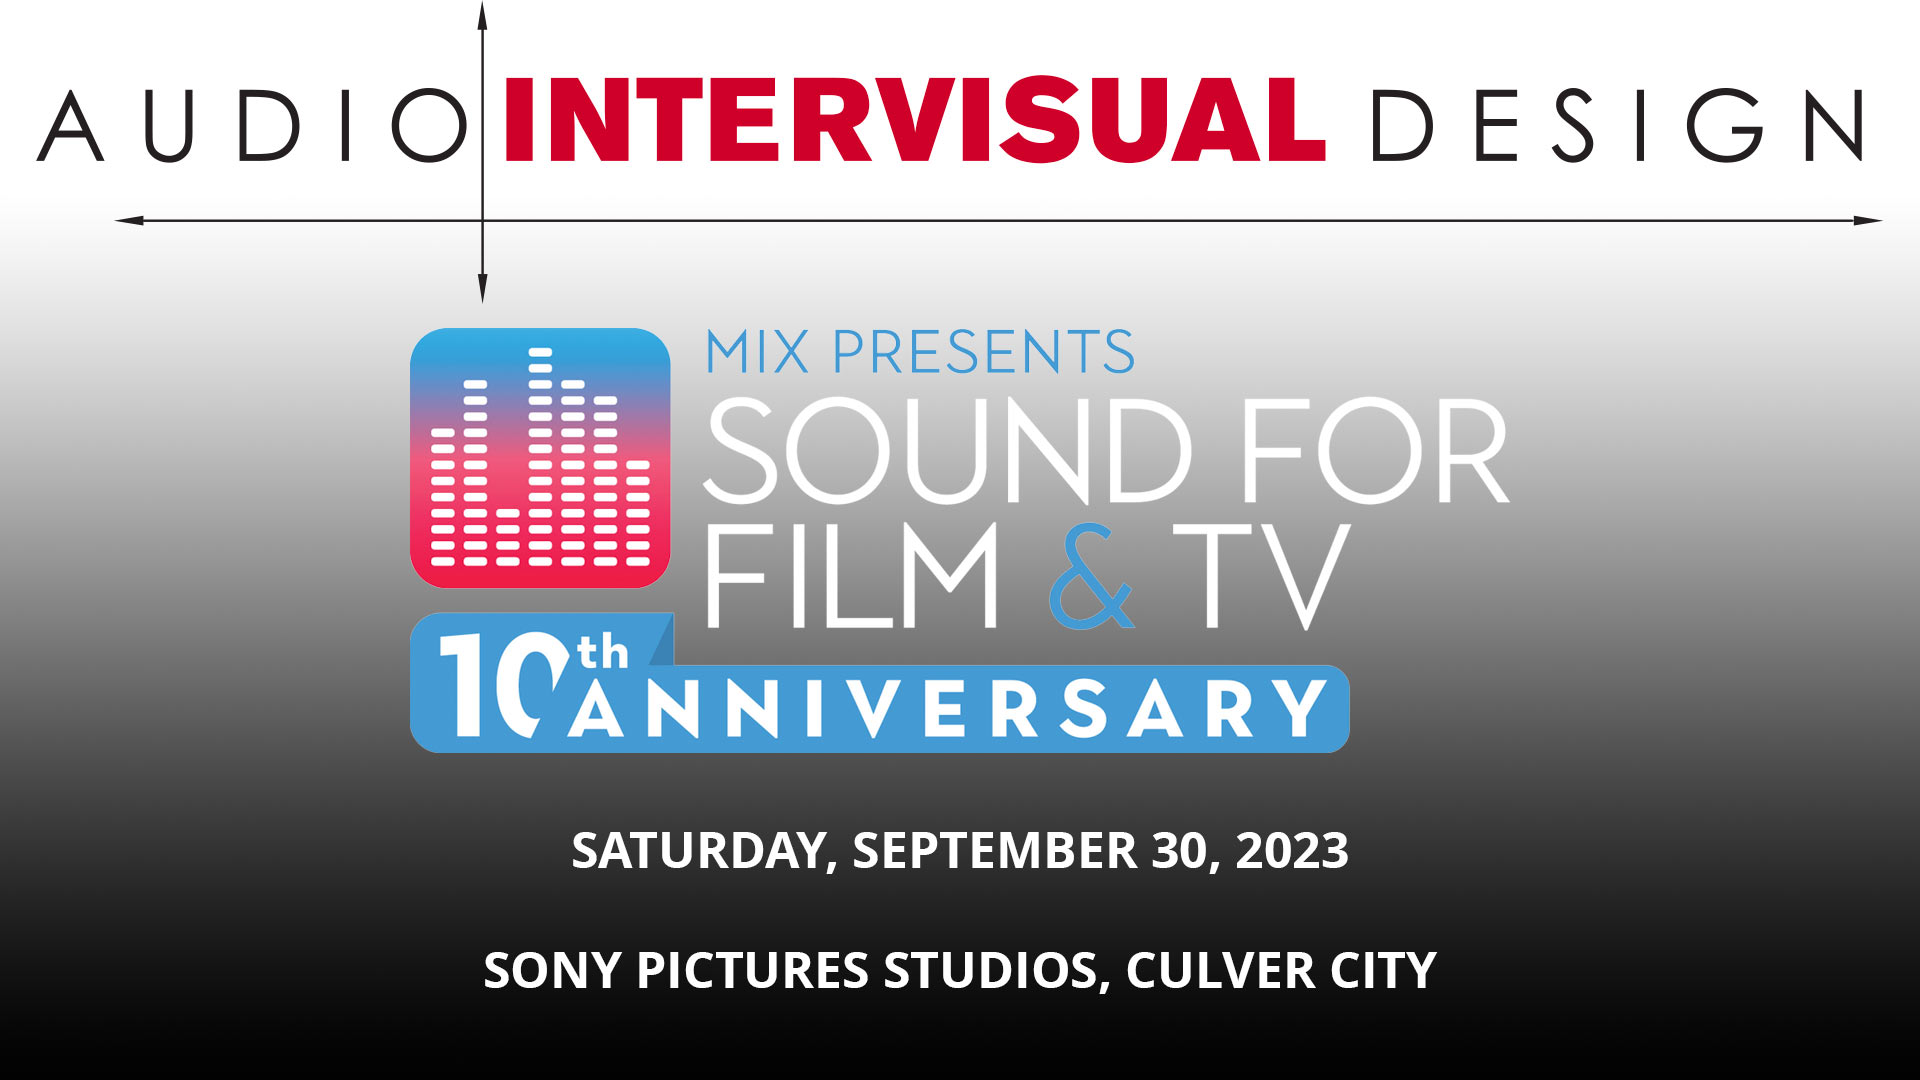 Audio Intervisual Design at Mix Presents: Sound for Film & Television